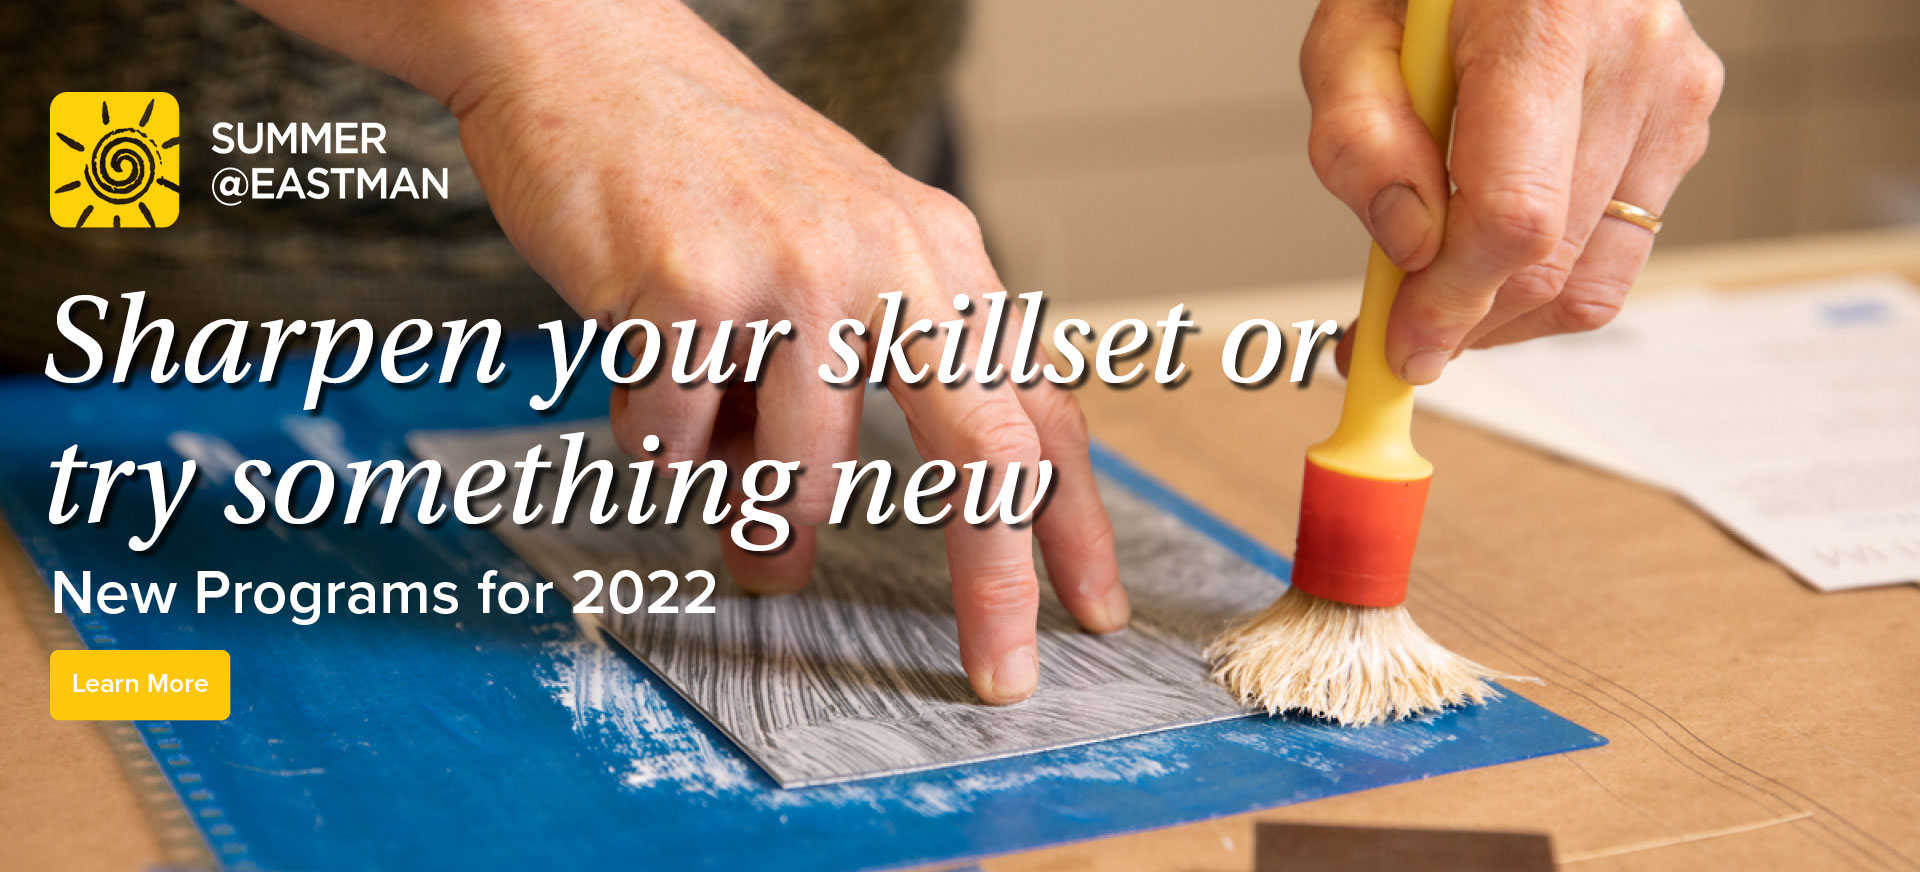 Sharpen Your Skill Set or Try Something New